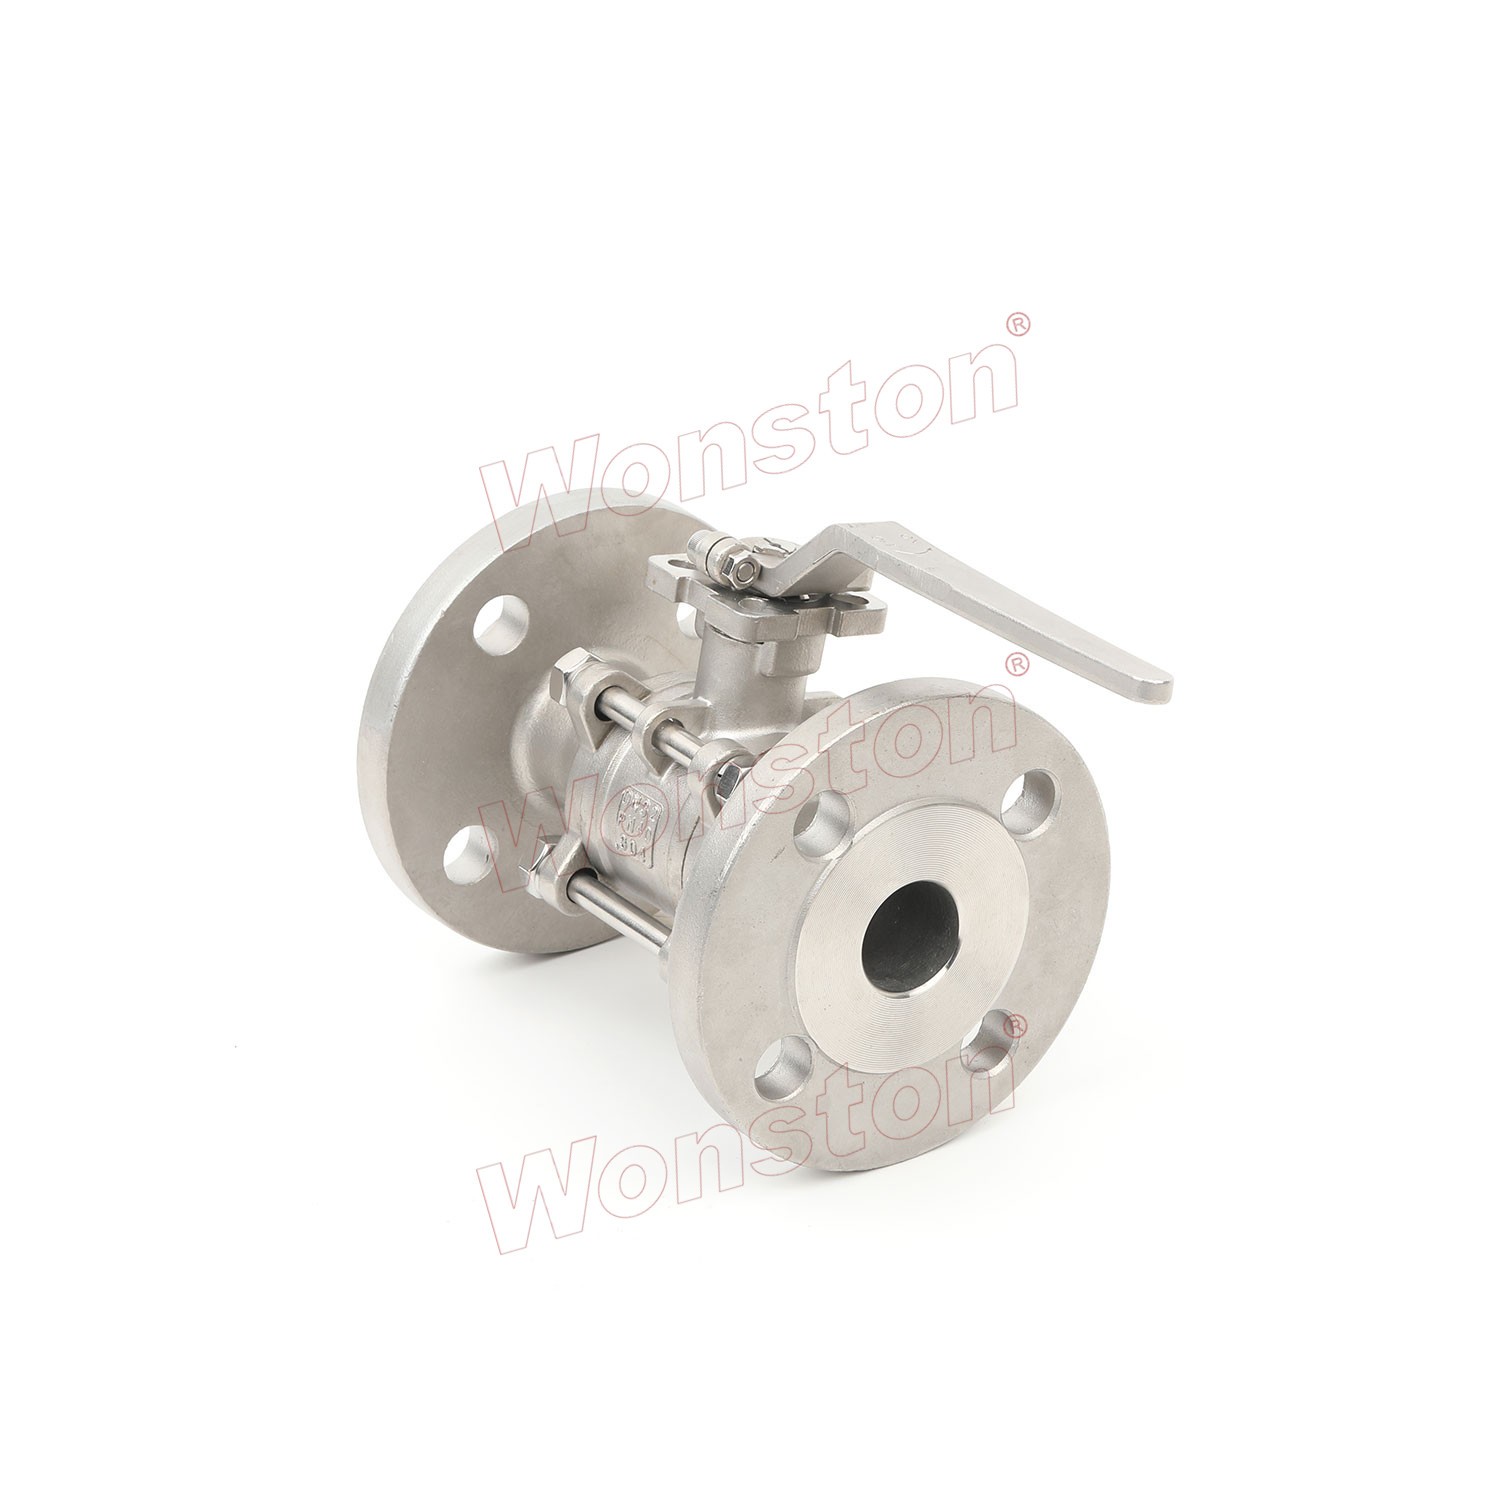 3PC Ball Valve Flanged End Direct Mounting Pad DIN Type